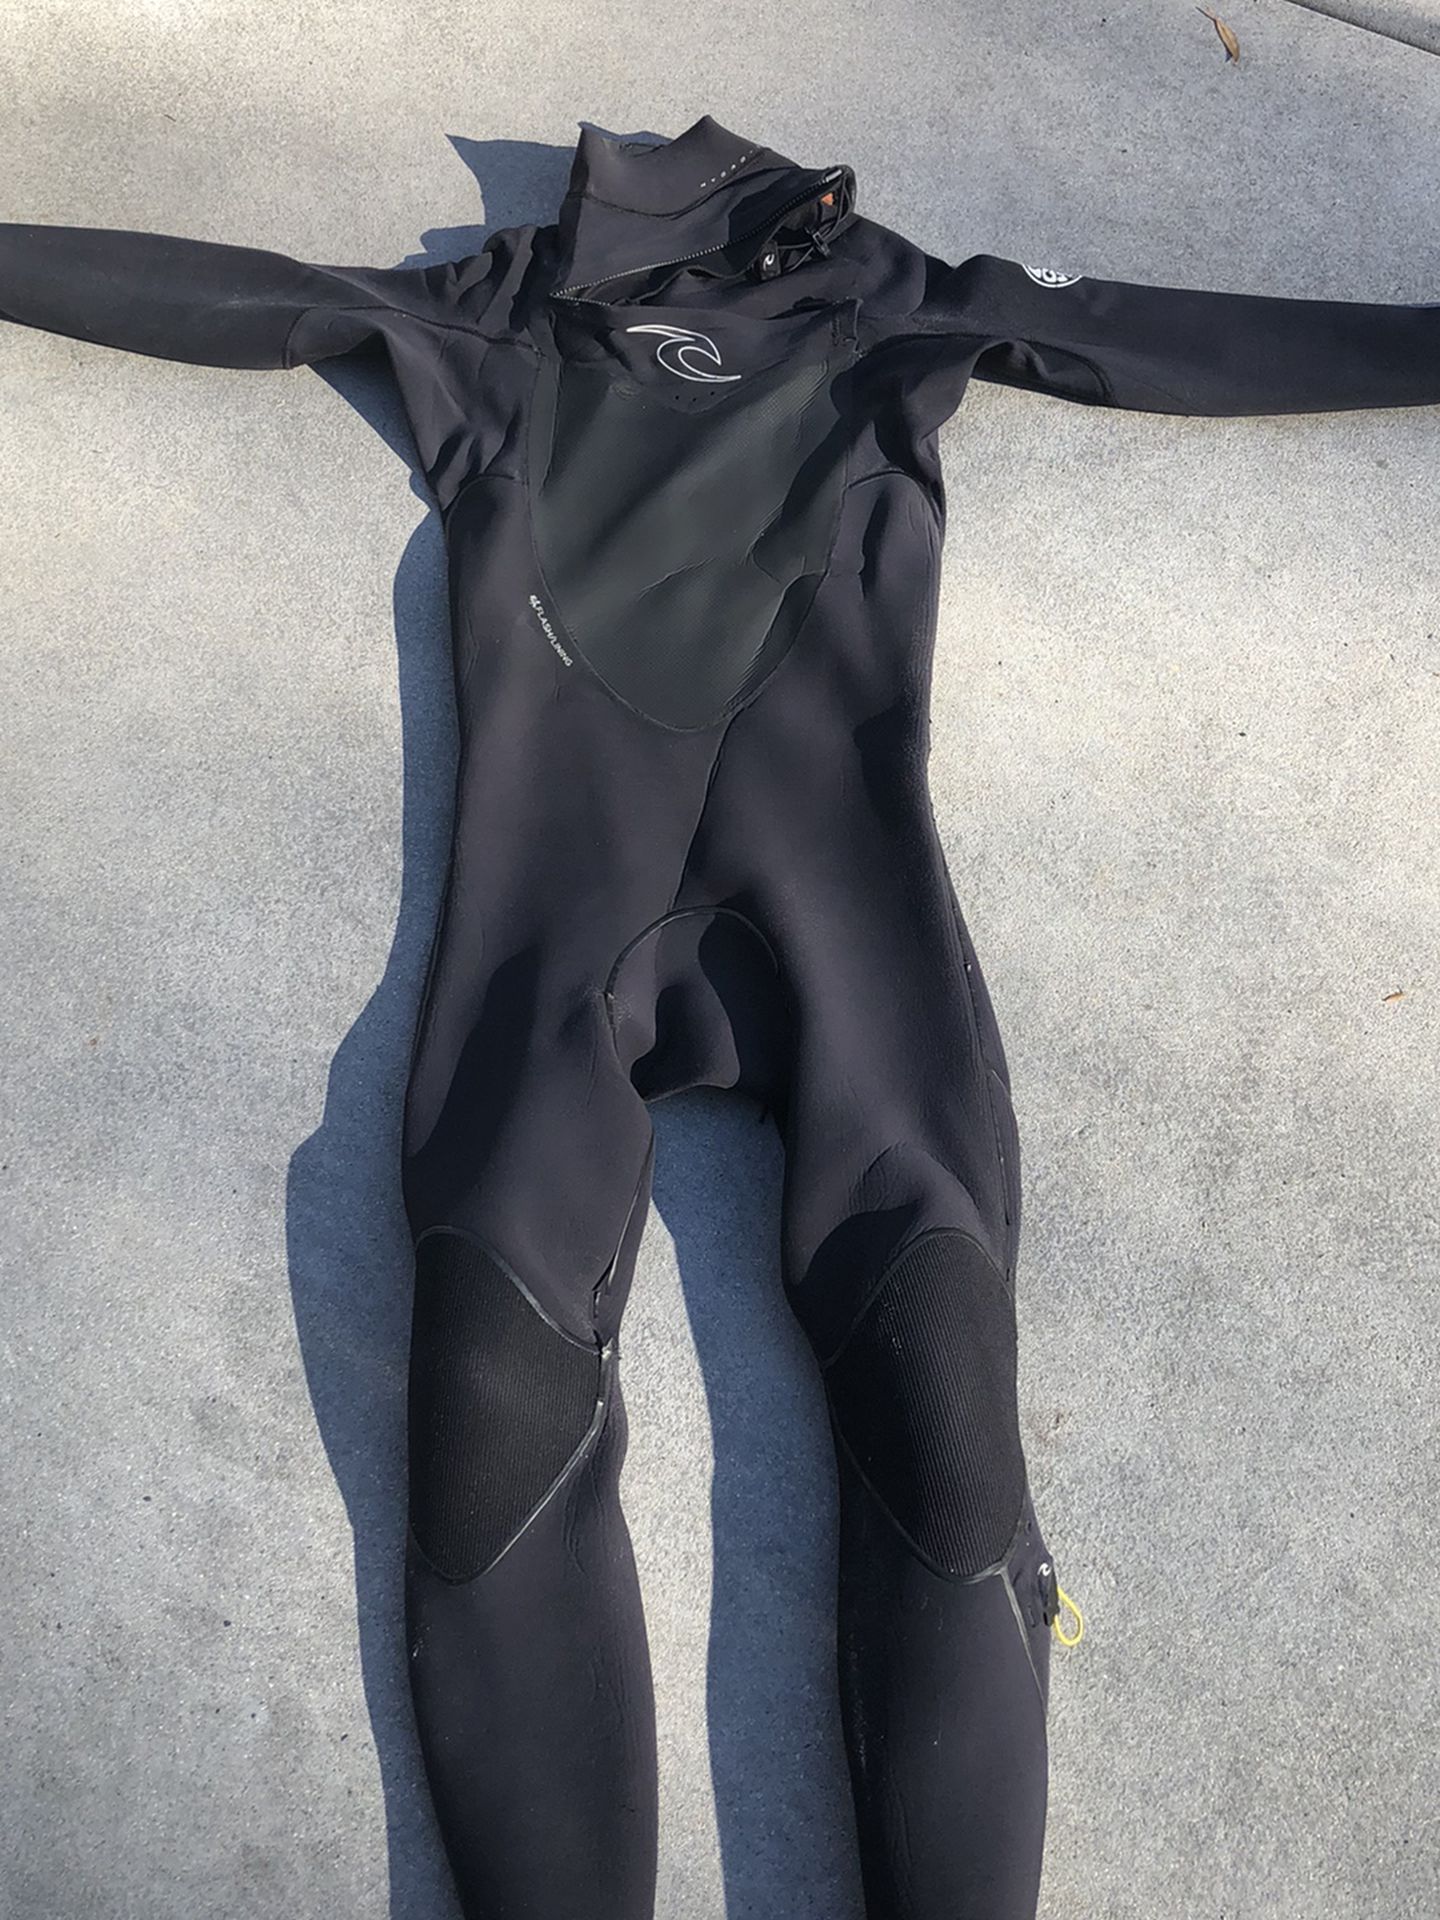 Rip Curl Flashbomb Wetsuit for Sale in San Diego, CA - OfferUp